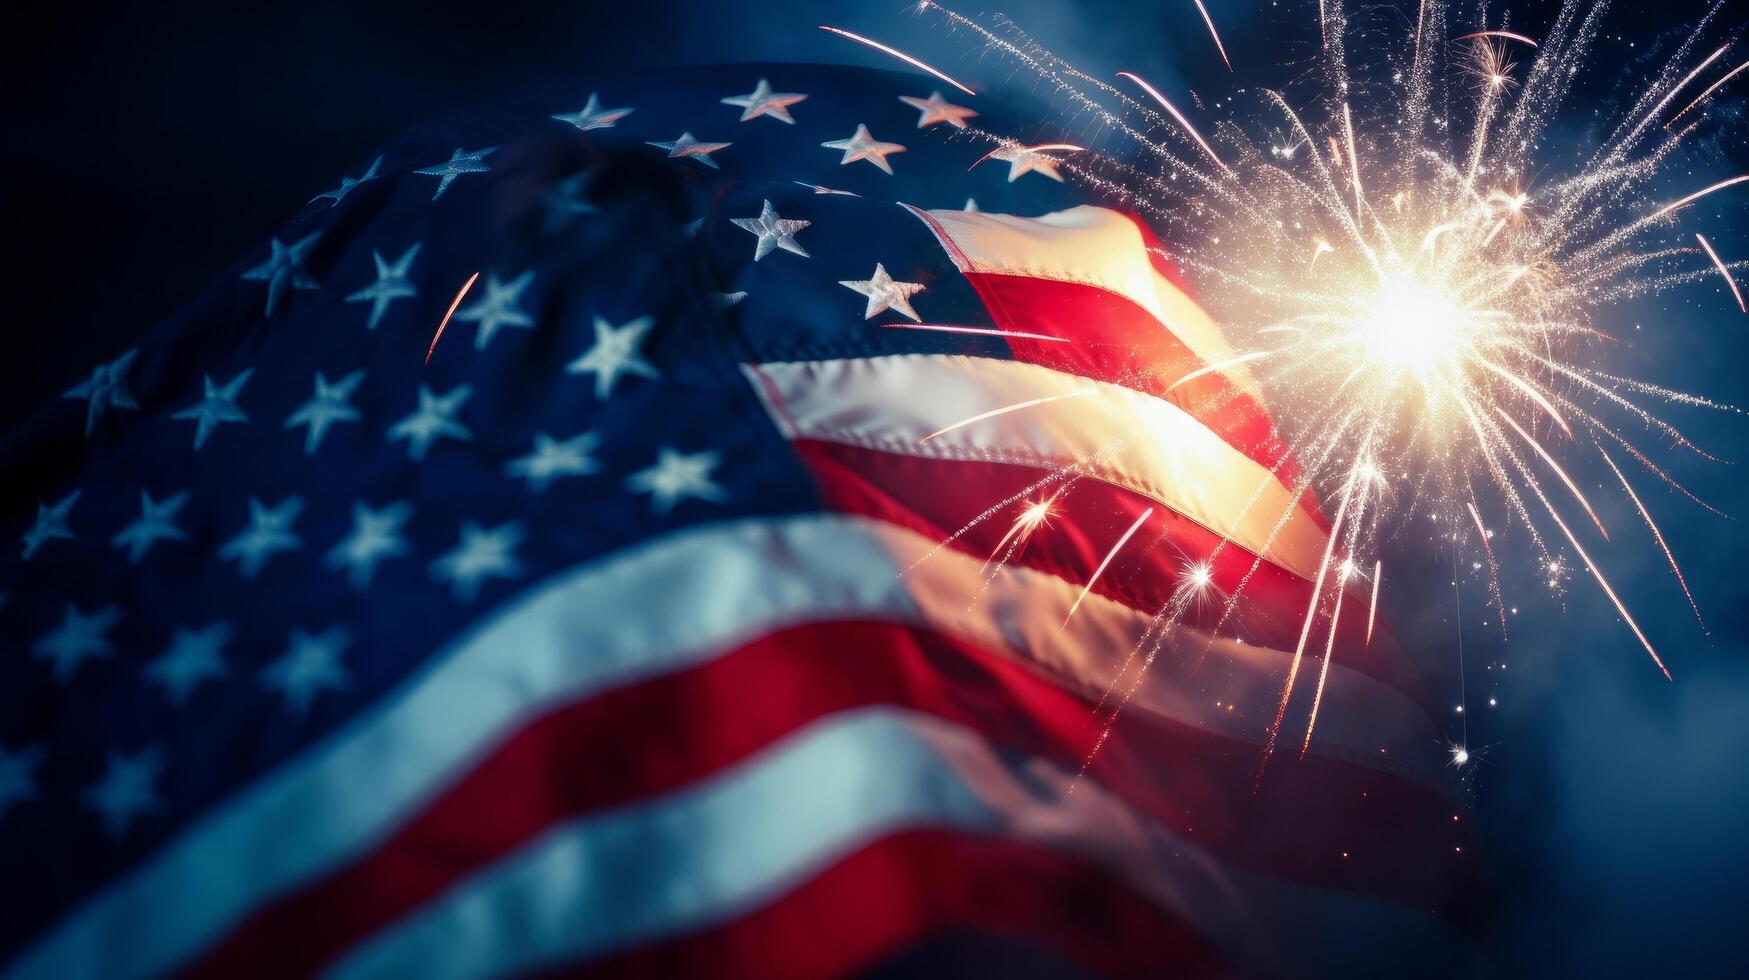 USA Holiday background with flag and fireworks. Illustration photo